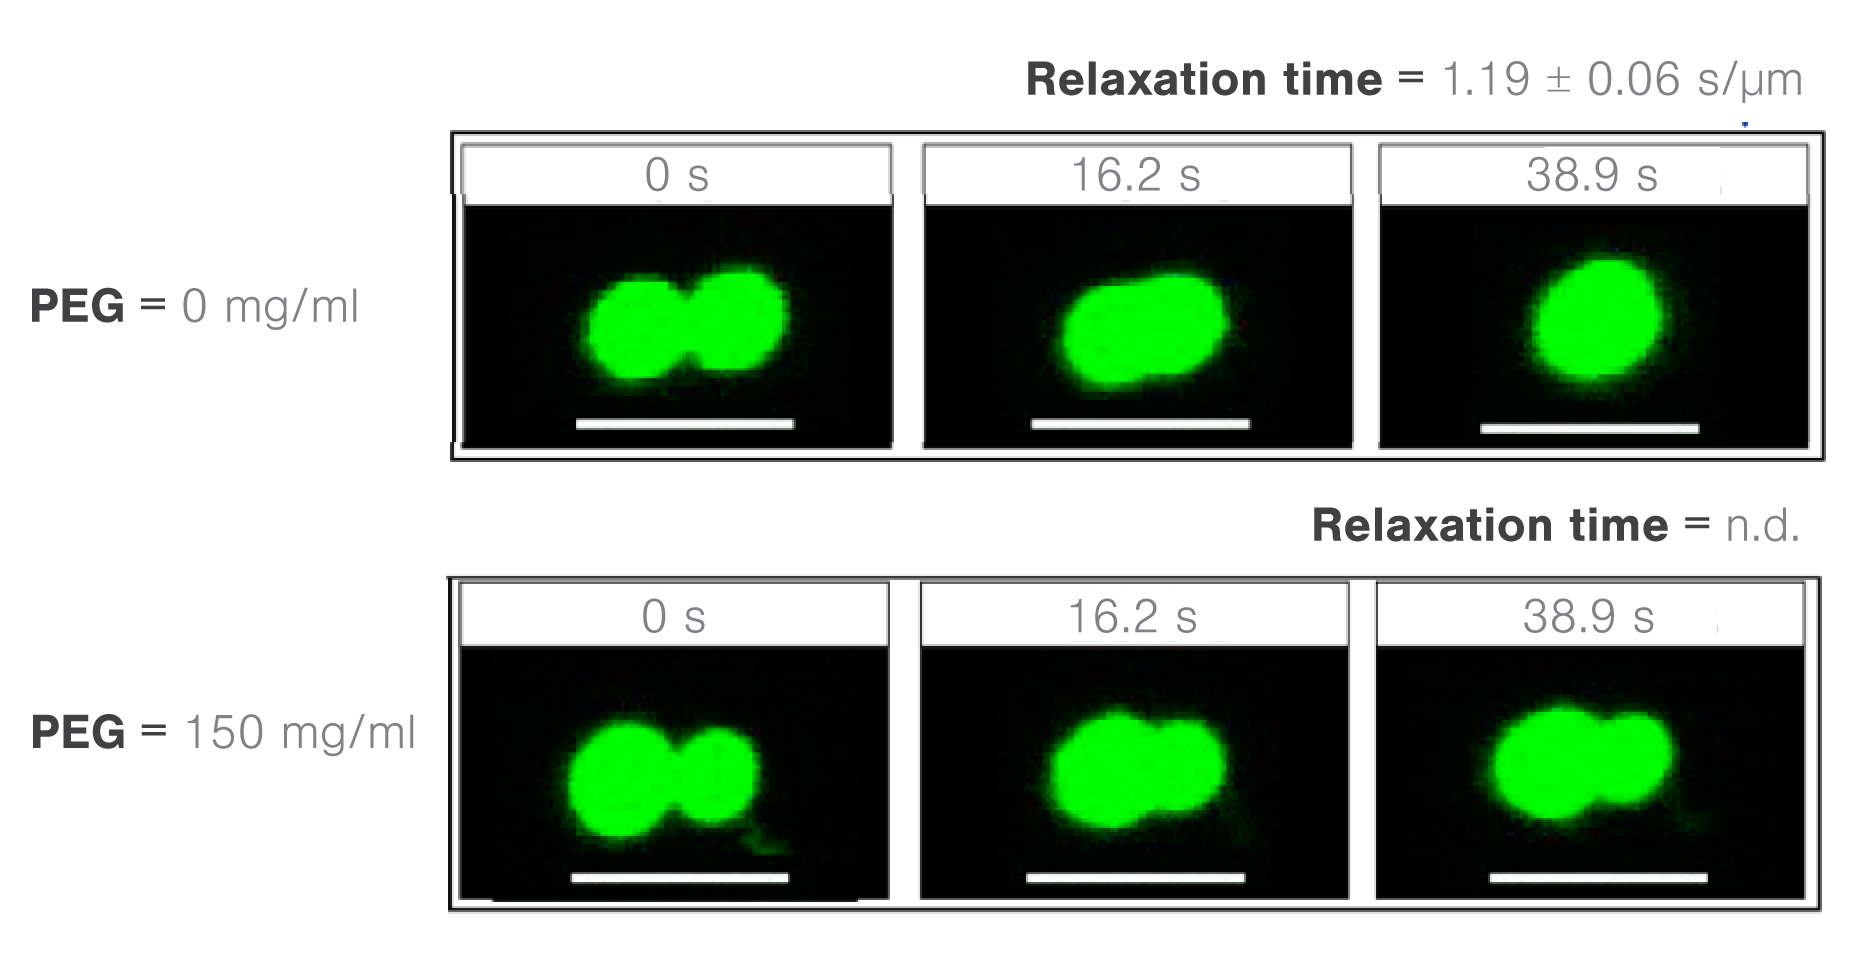 Images showing timelapses of FUS droplet fusion as a function of PEG8000 modecular croder concentrations v2